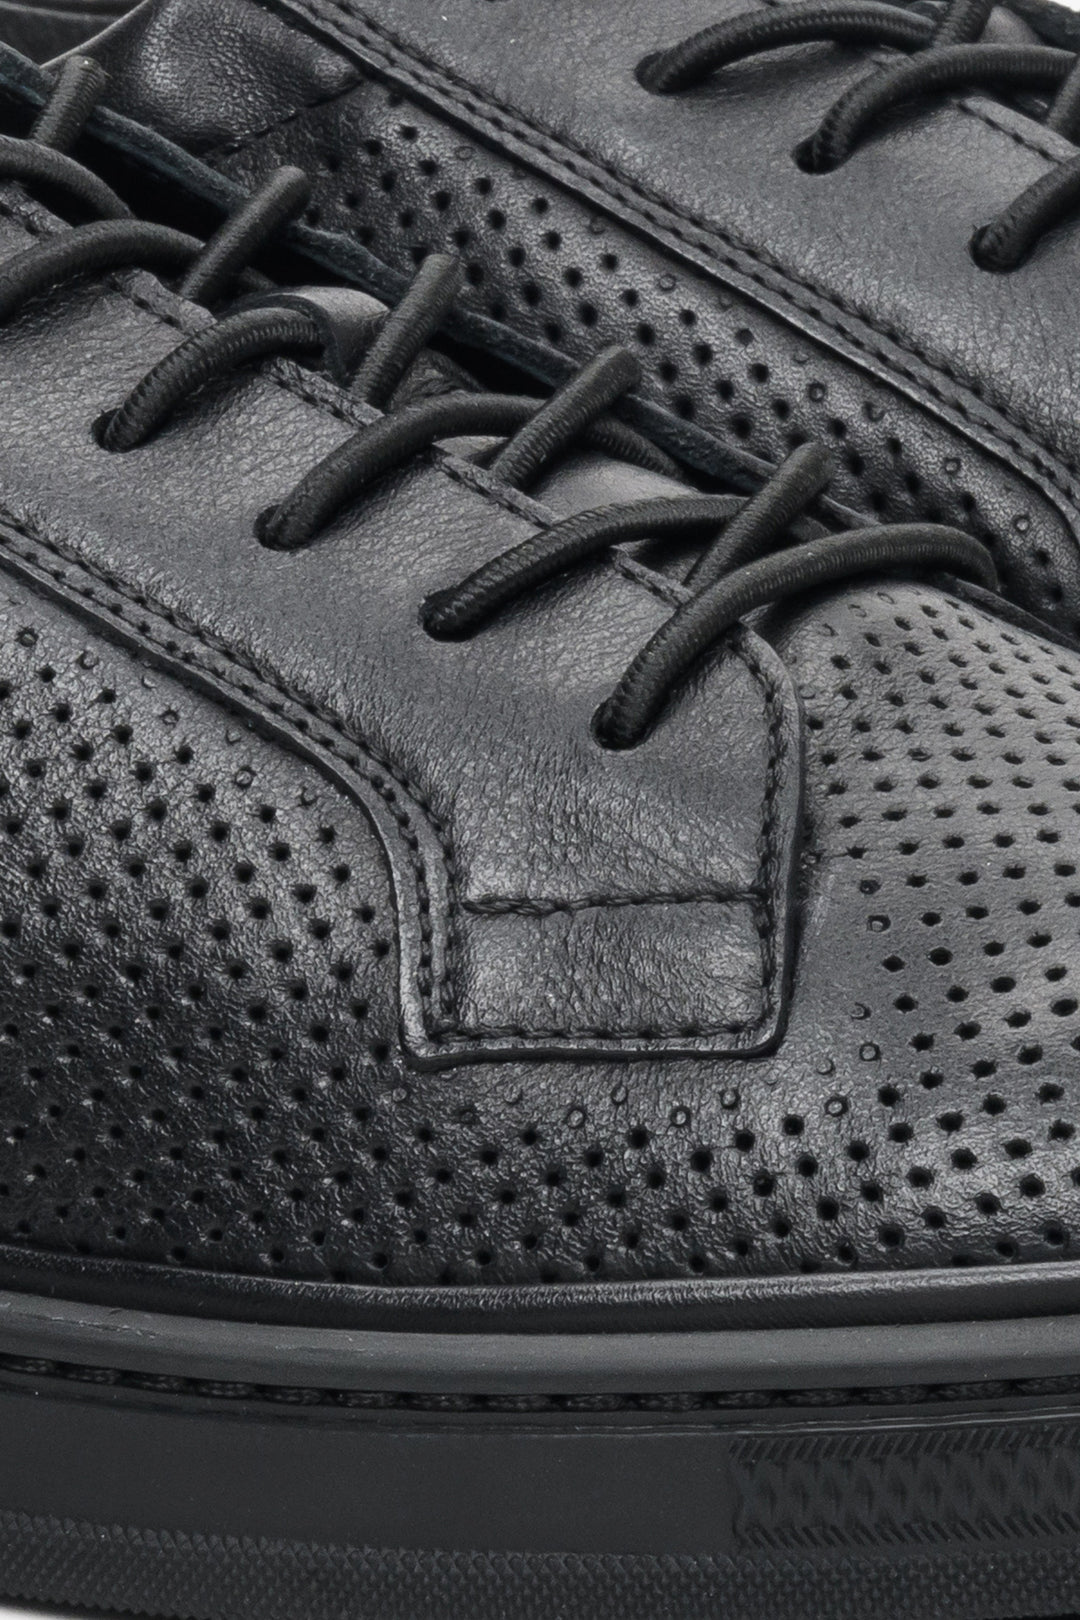 Estro men's sneakers in black with perforations and lacing for summer - close-up on details.